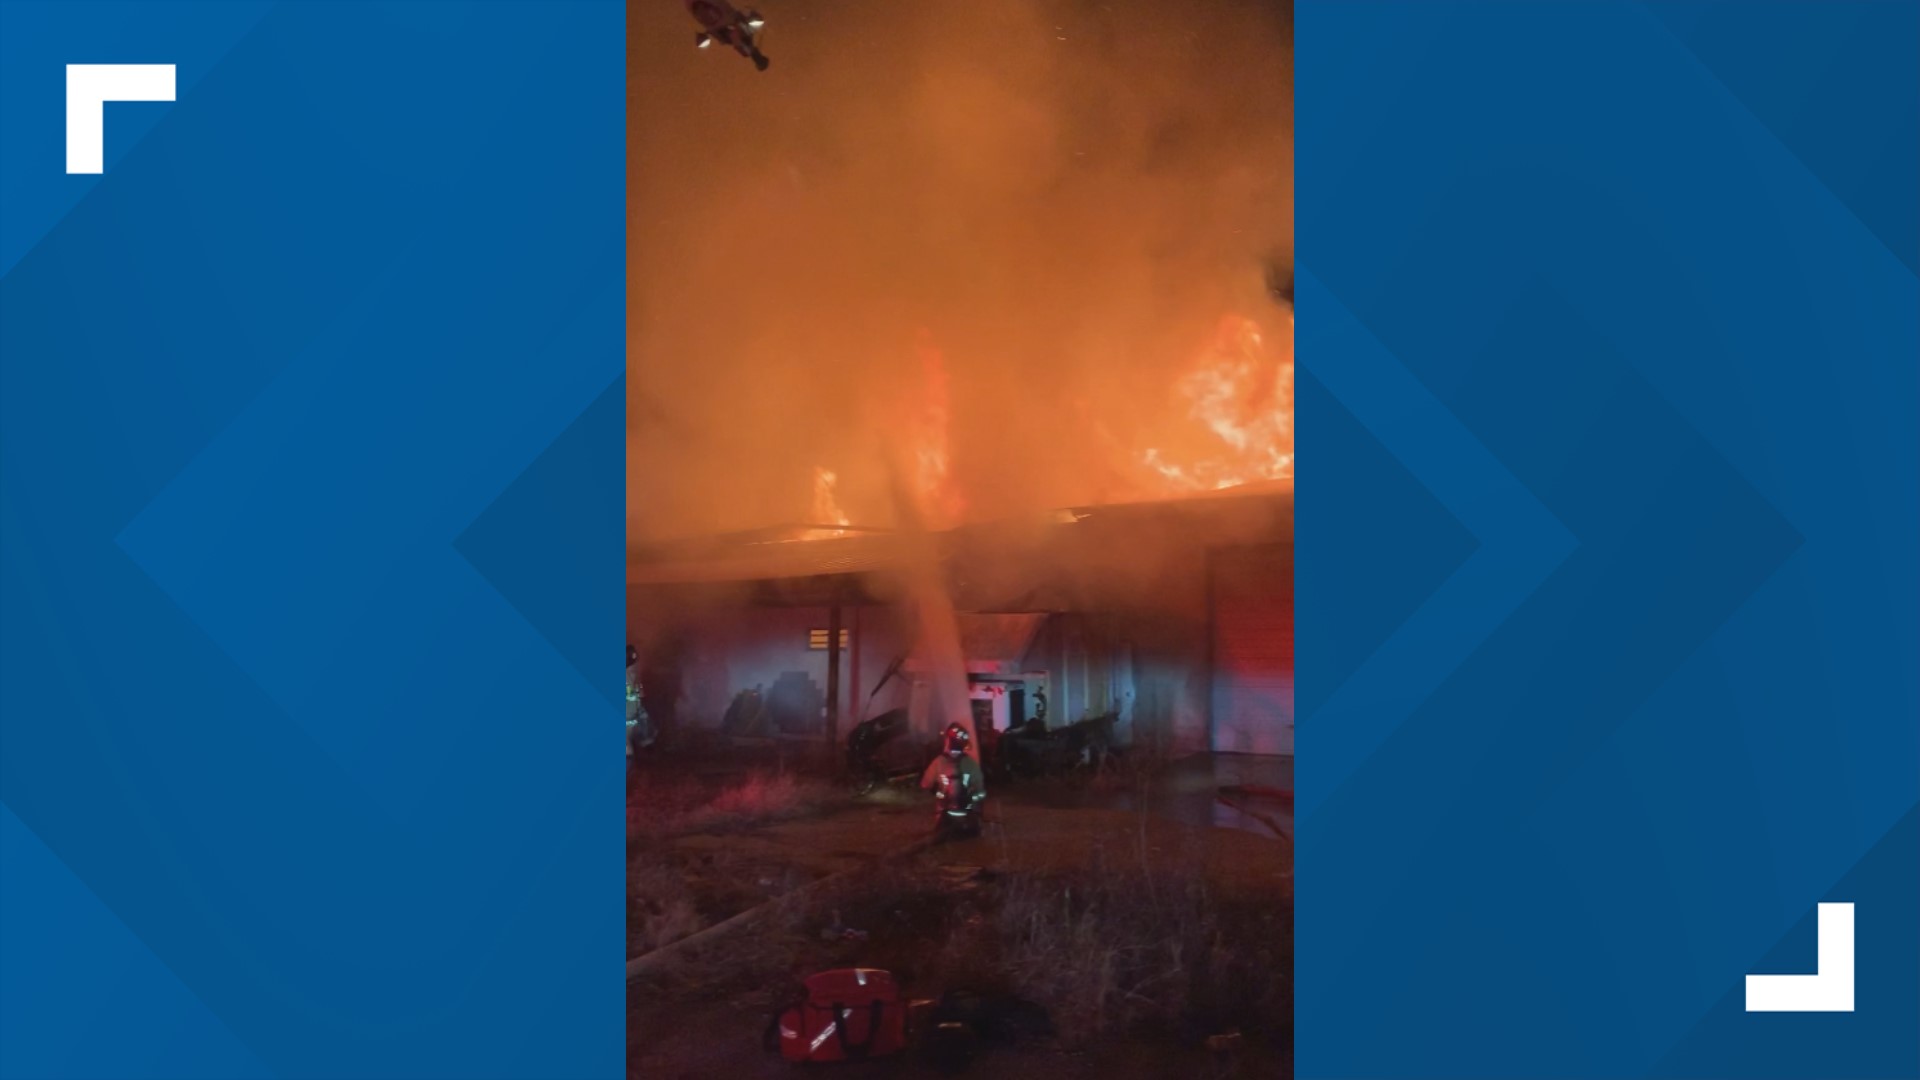 The fire department says it took nearly 40 firefighters around 30 minutes to get the fire under control. There have been no injuries reported.